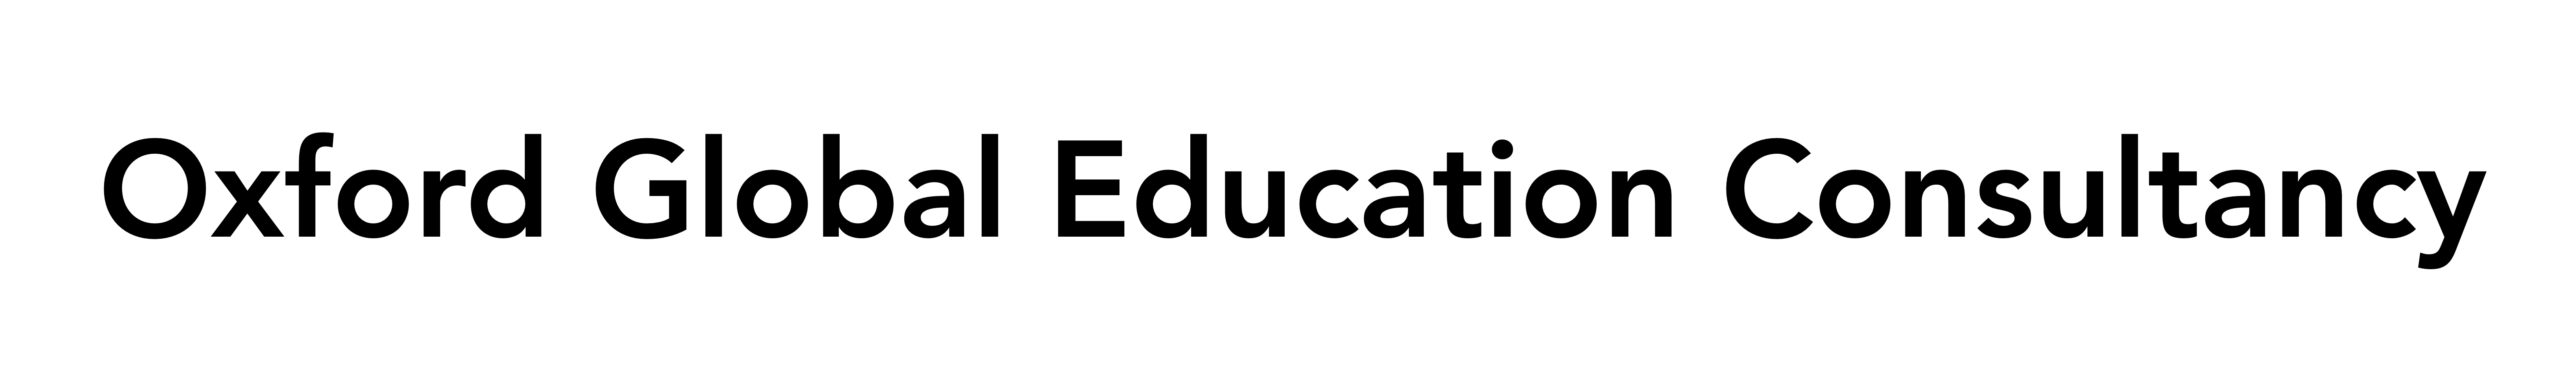 Oxford Global Education Consultancy